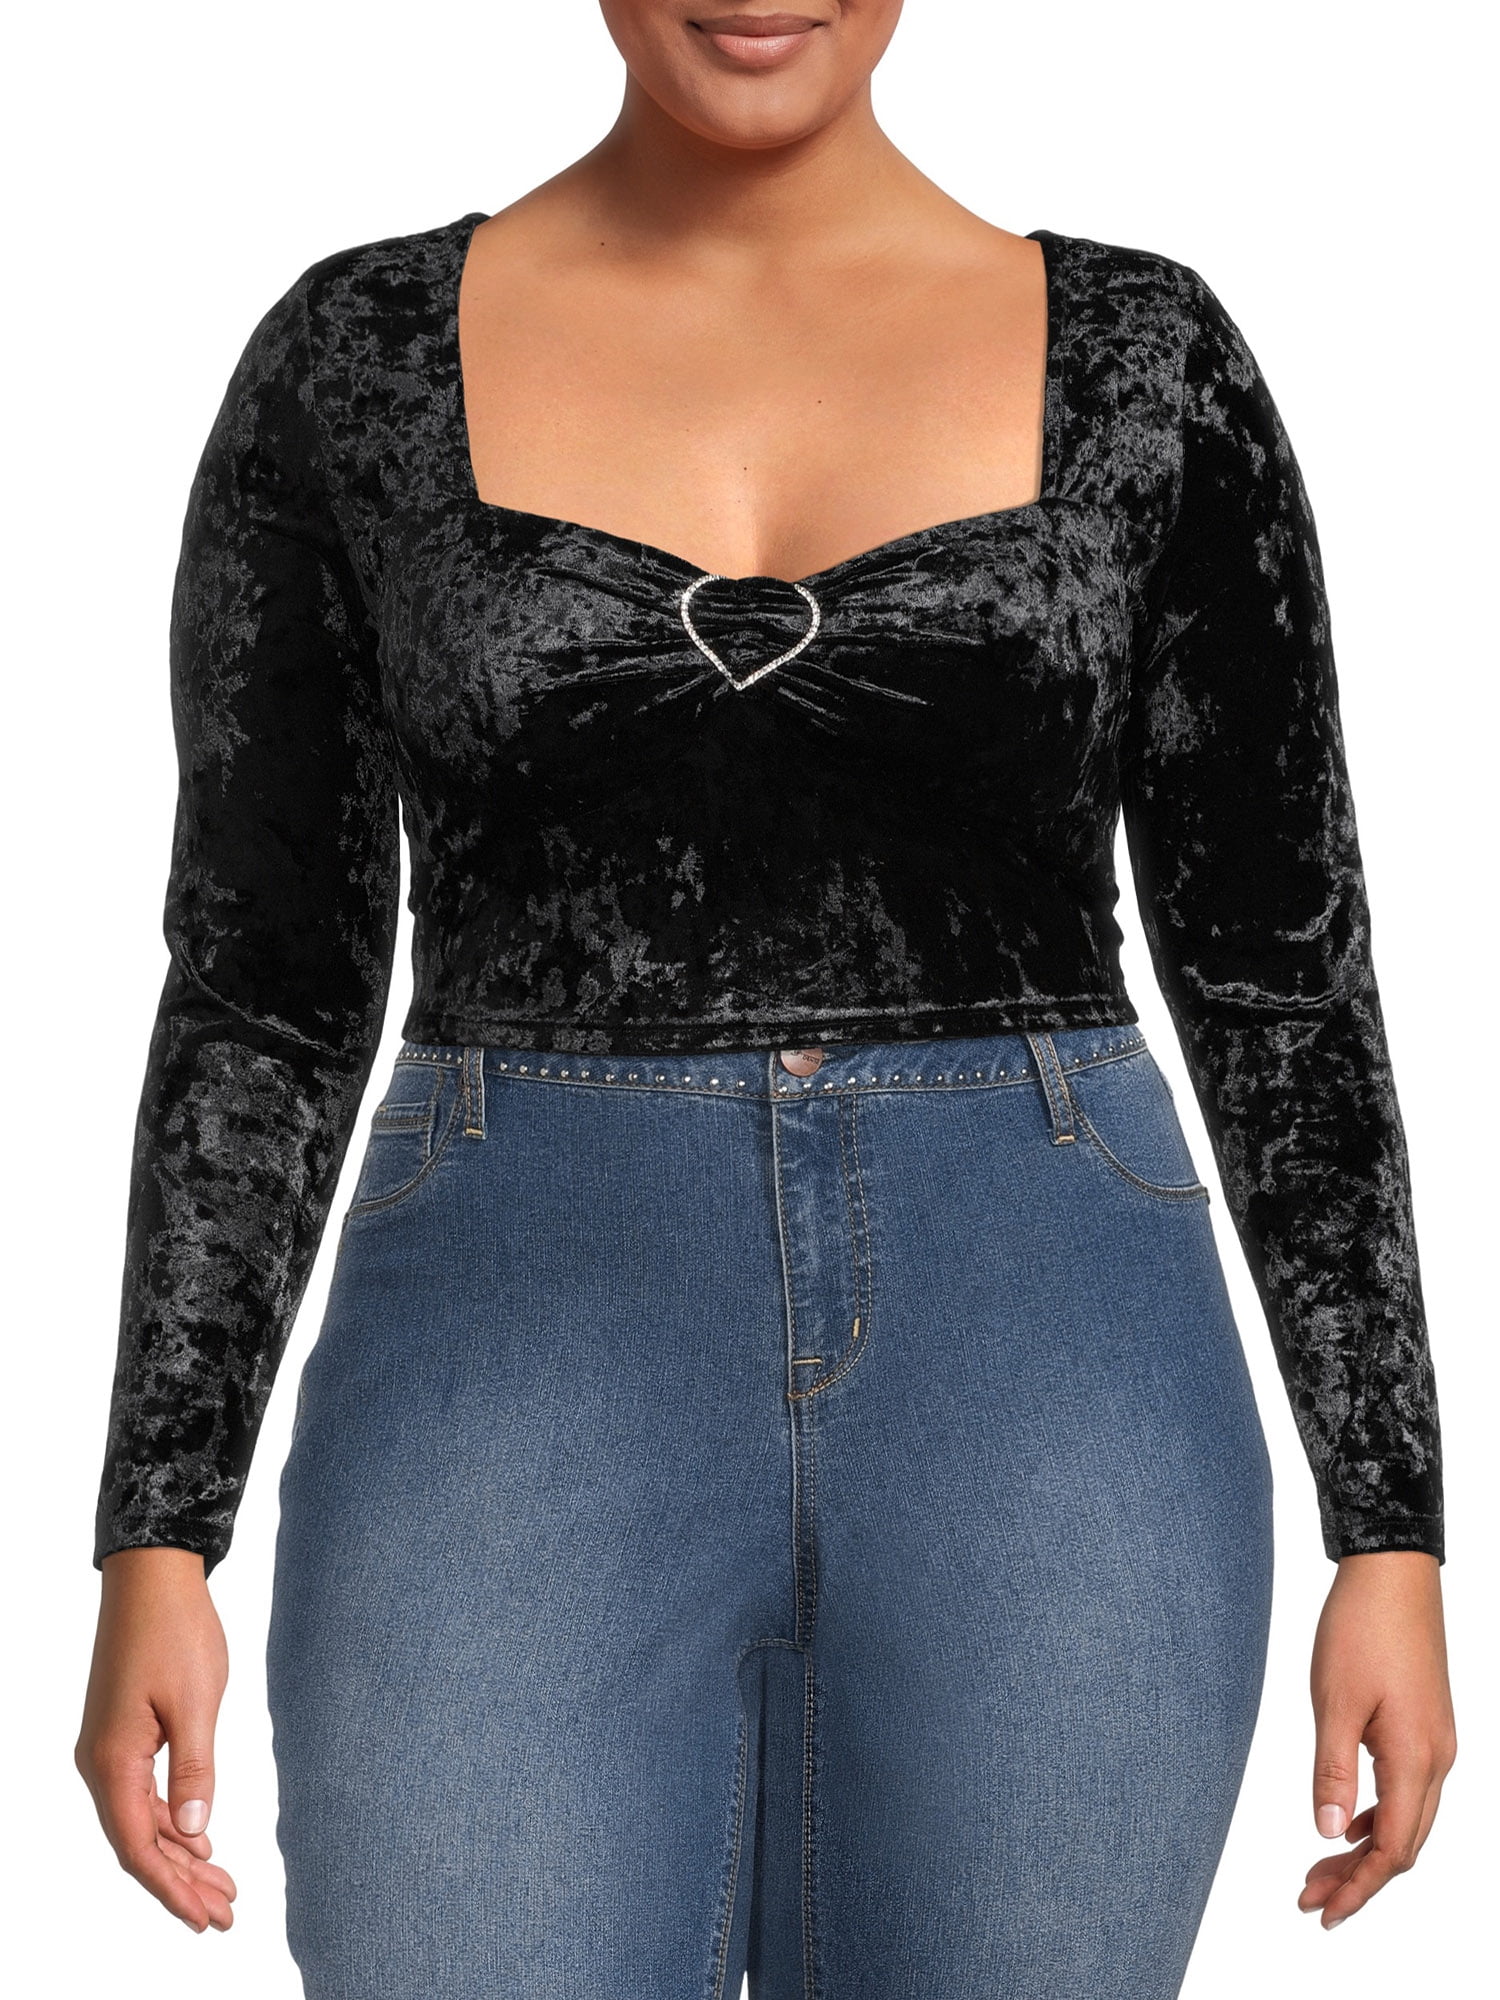 Madden NYC Women's Plus Size Cropped Velour Top with Rhinestone Heart ...